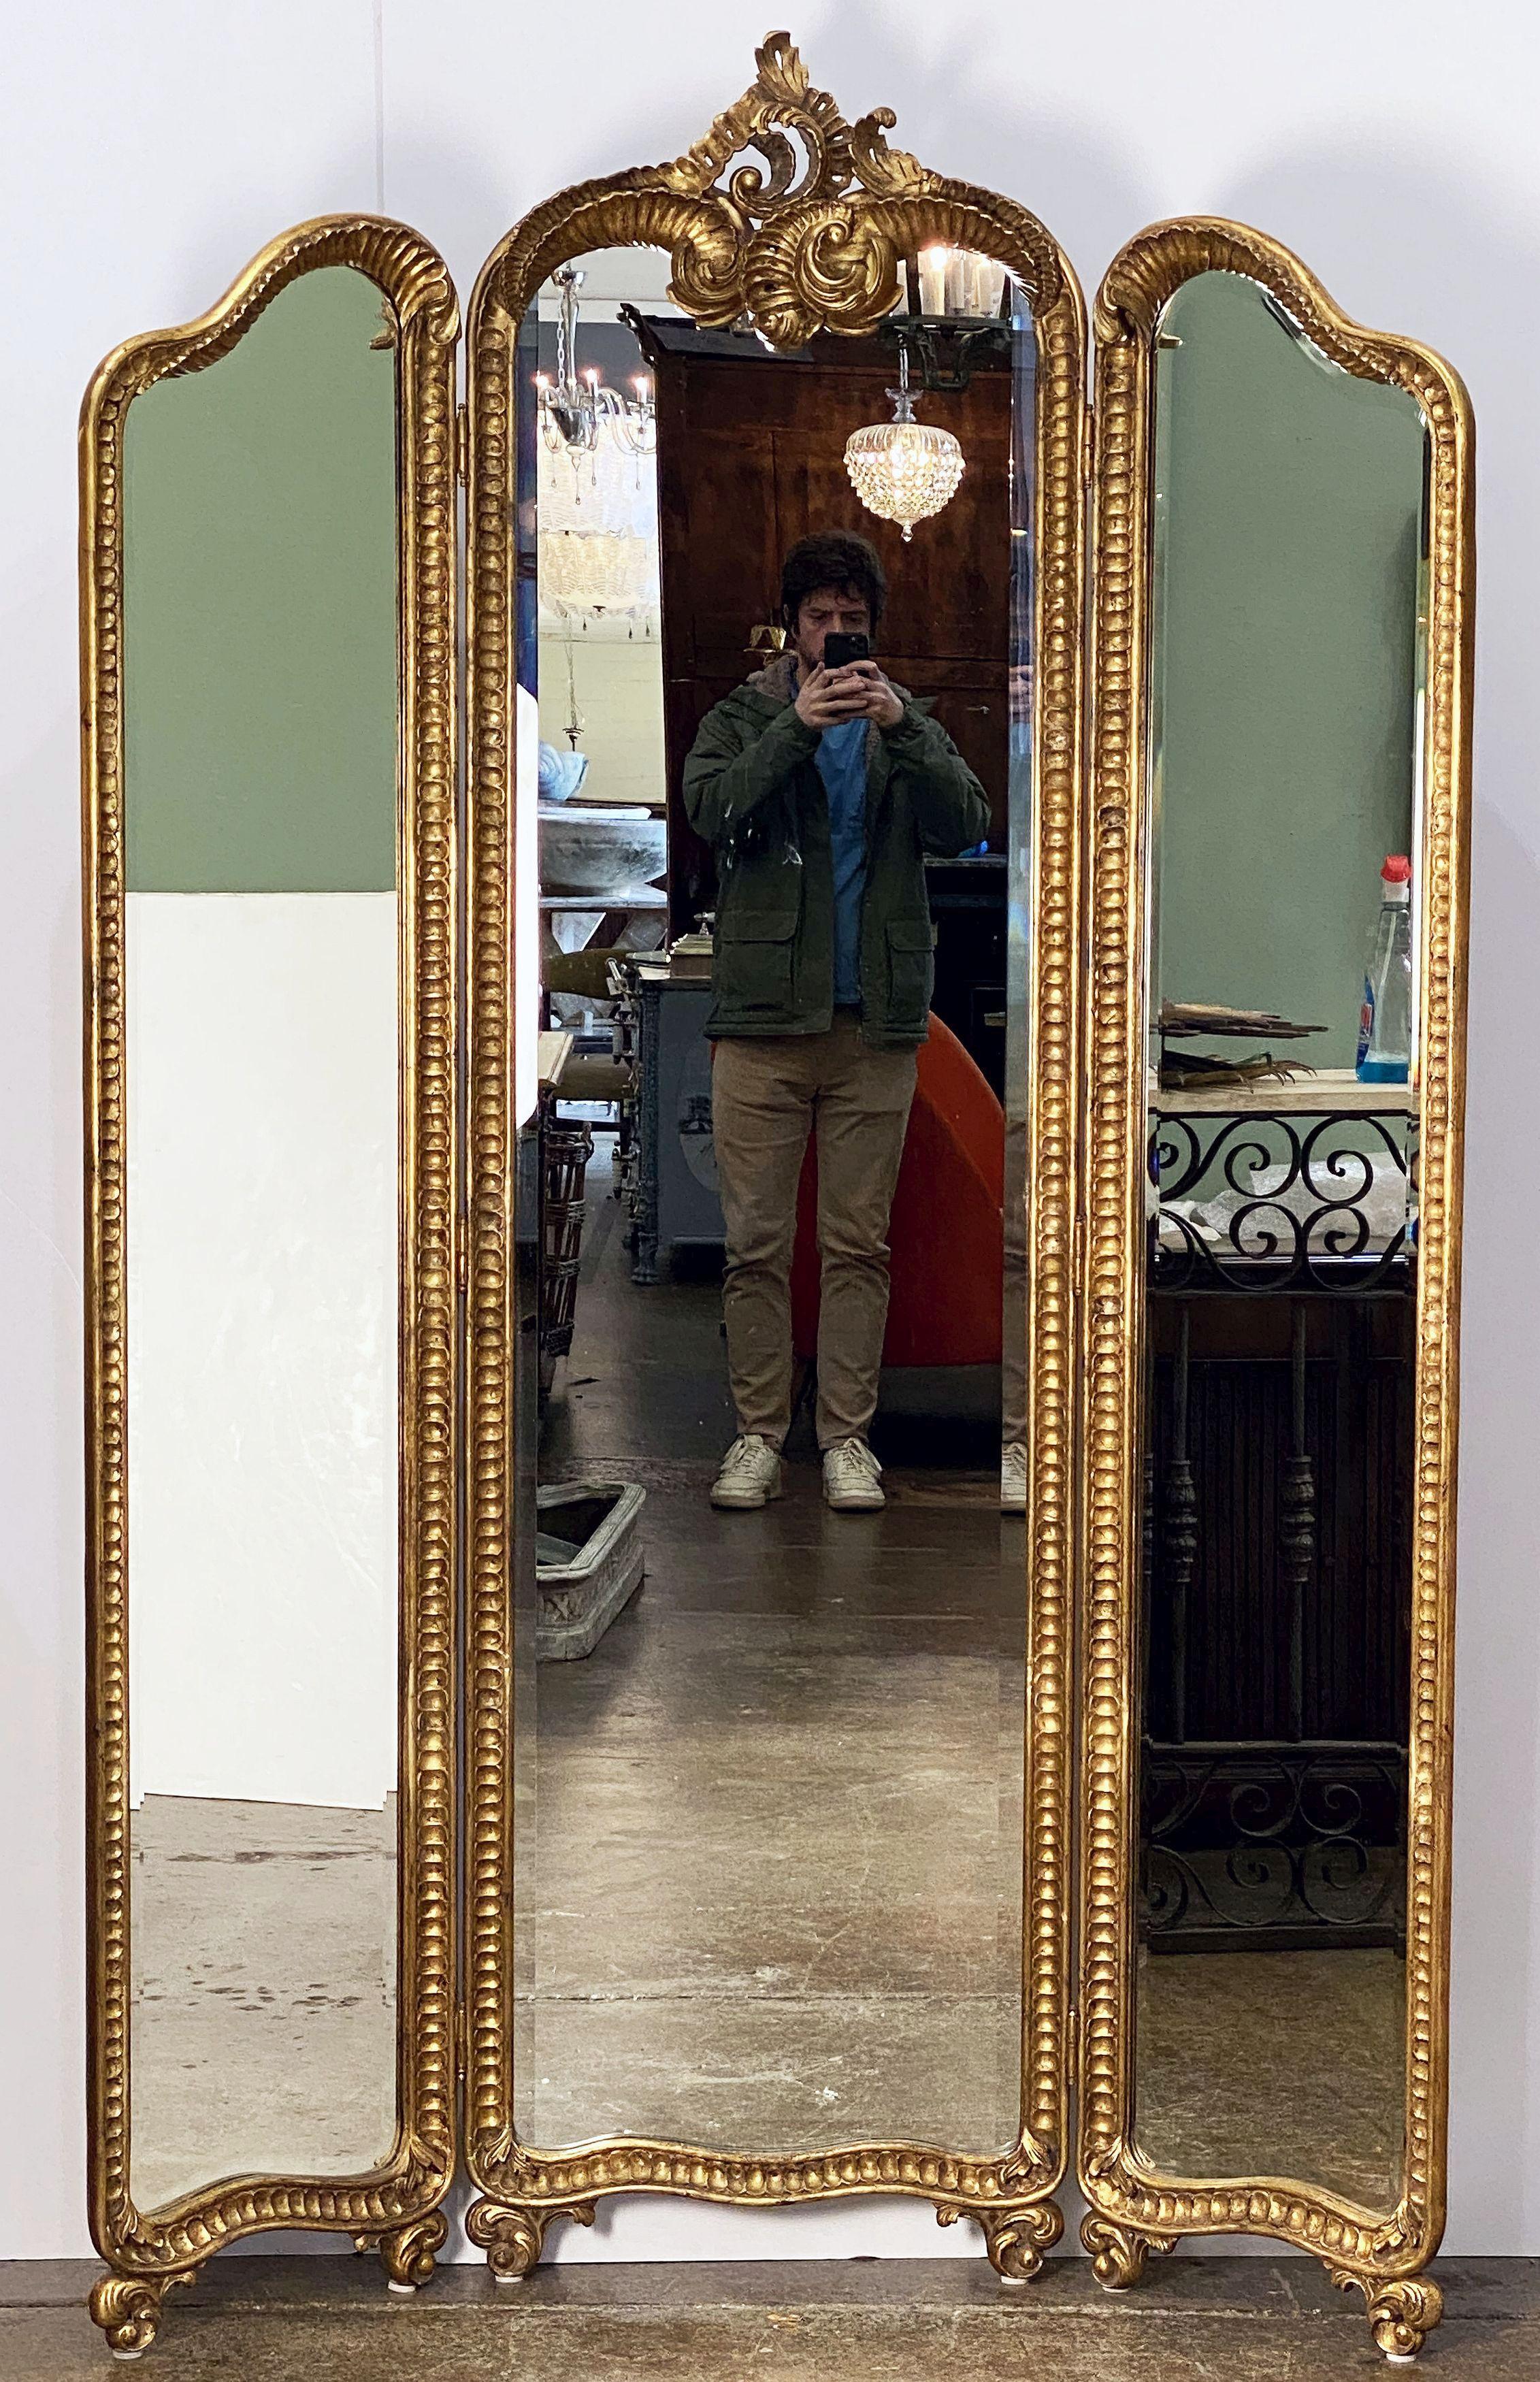 A fine English three-panel folding floor-standing dressing mirror, circa 1920, featuring a carved giltwood center frame with two removable side panels - each embellished with a Rococo design and shaped beveled mirror glass, standing on stylized